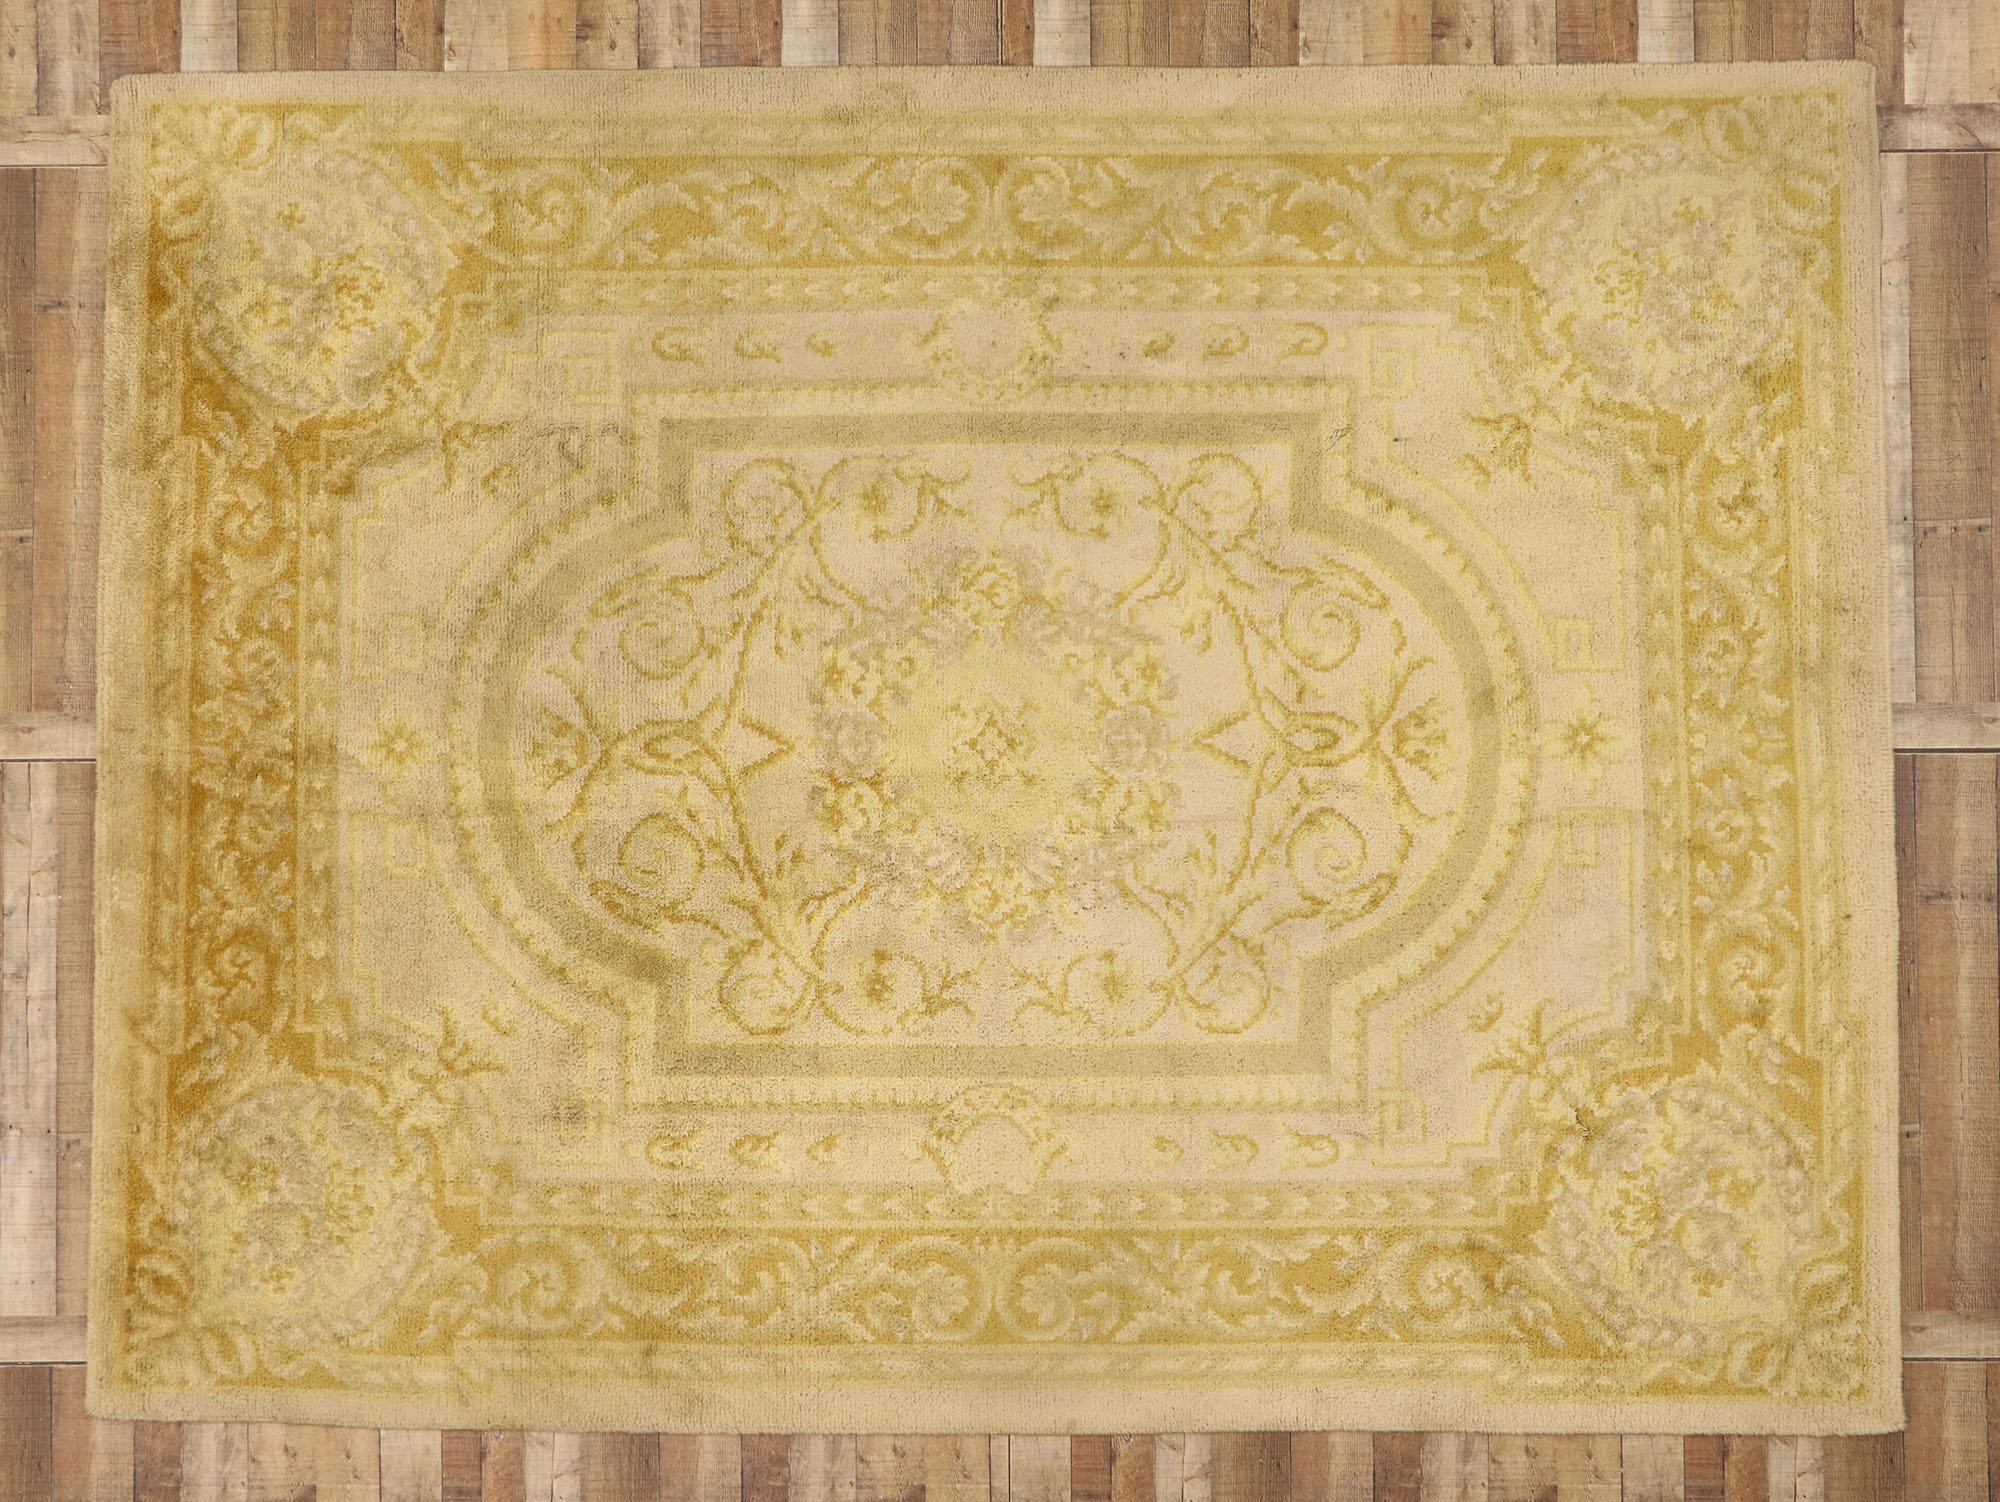 Antique Spanish Savonnerie Rug with Louis XIV Style For Sale 2